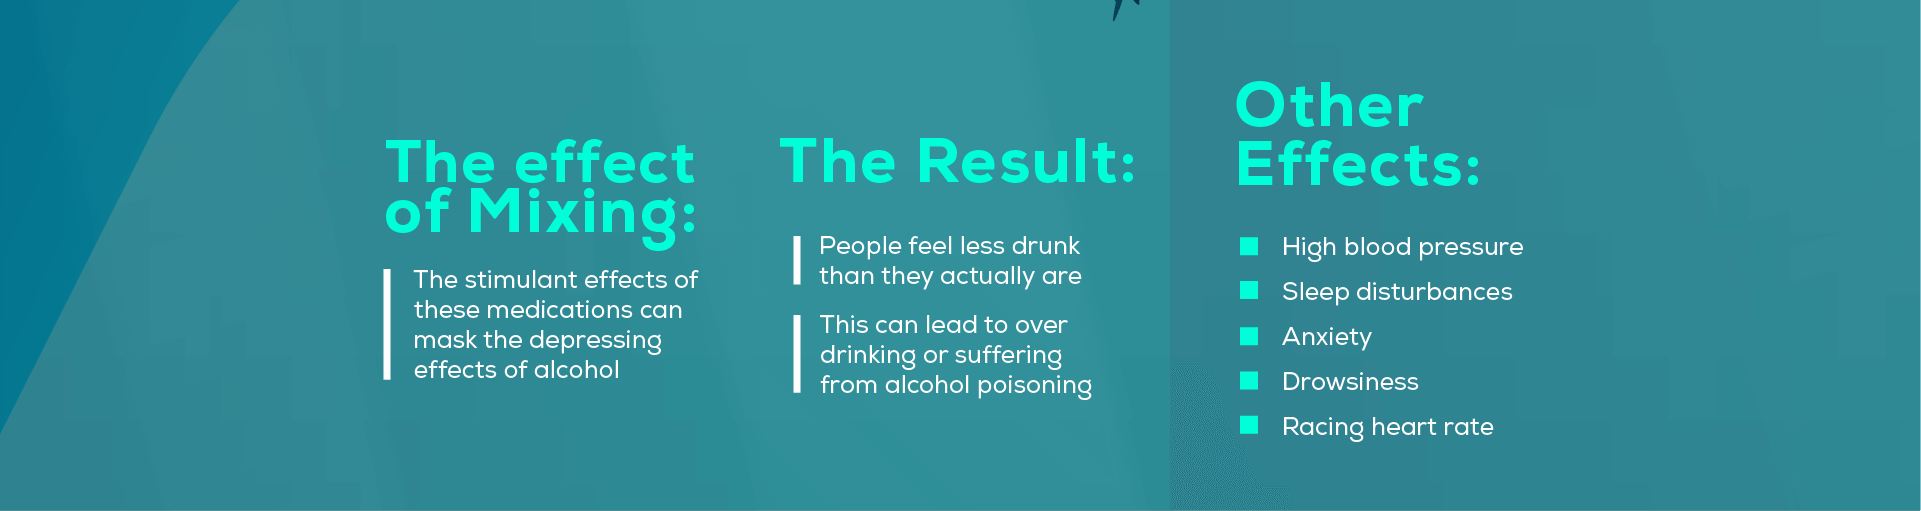 Effects of Mixing Alcohol and Stimulants